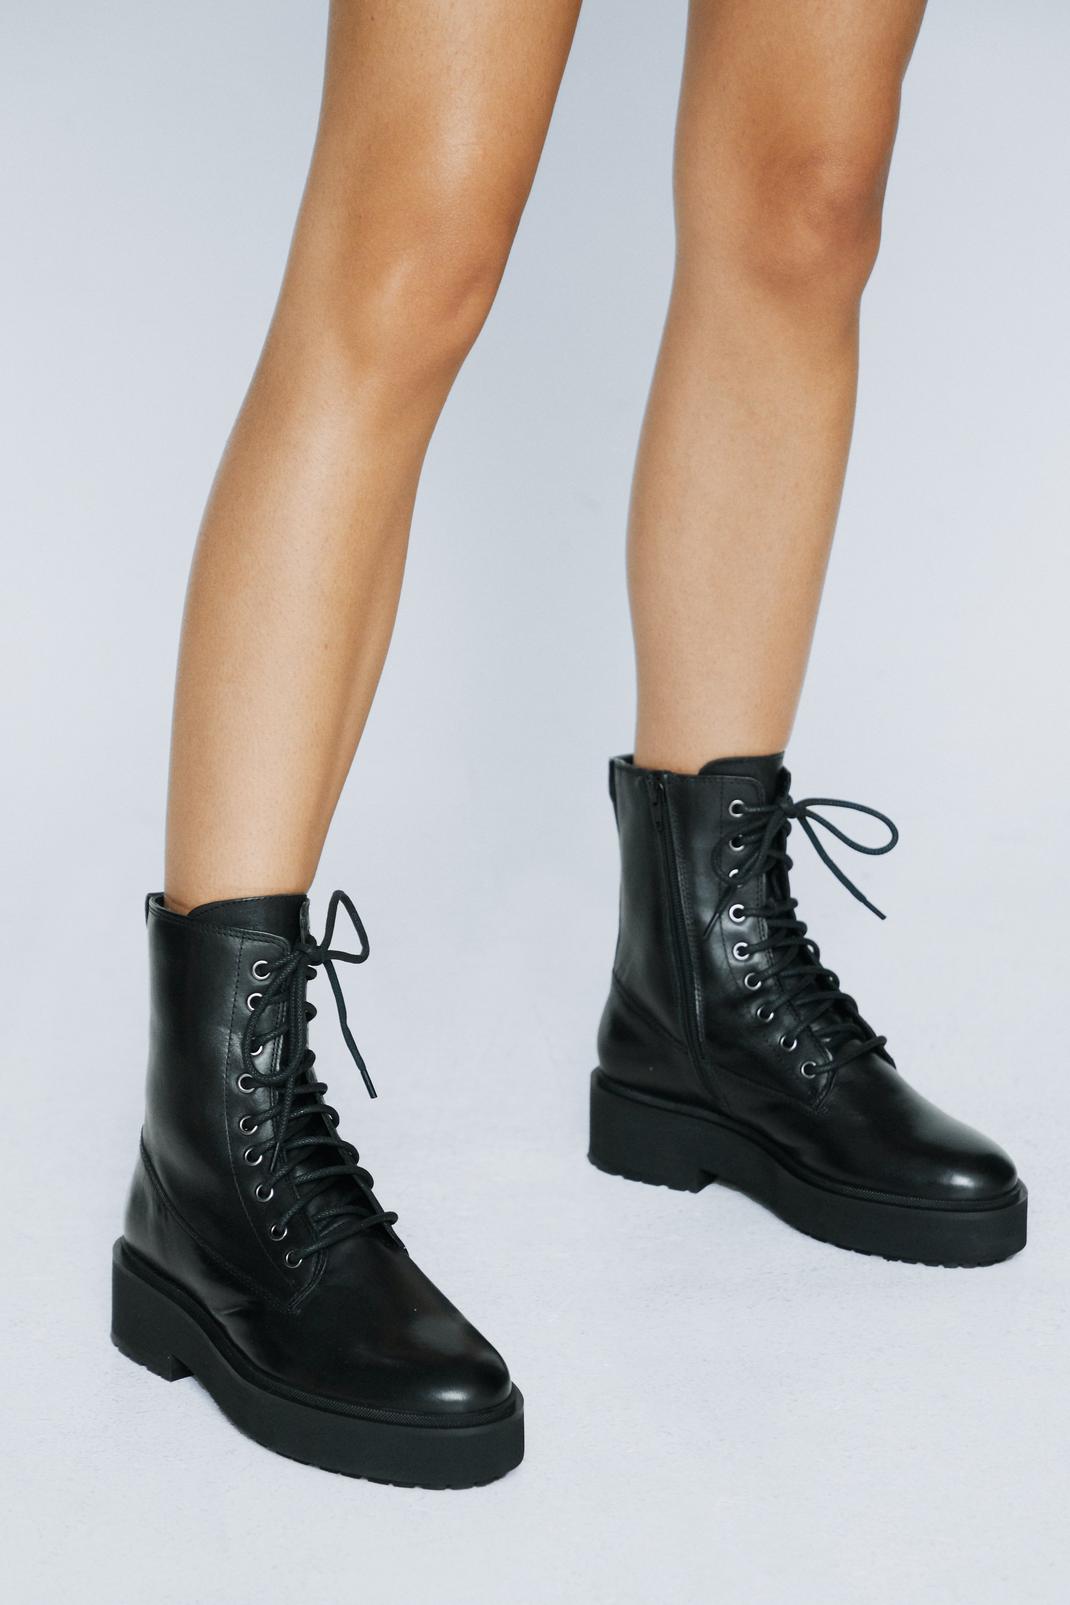 syndroom strottenhoofd rek Real Leather Lace Up Biker Boots | Nasty Gal